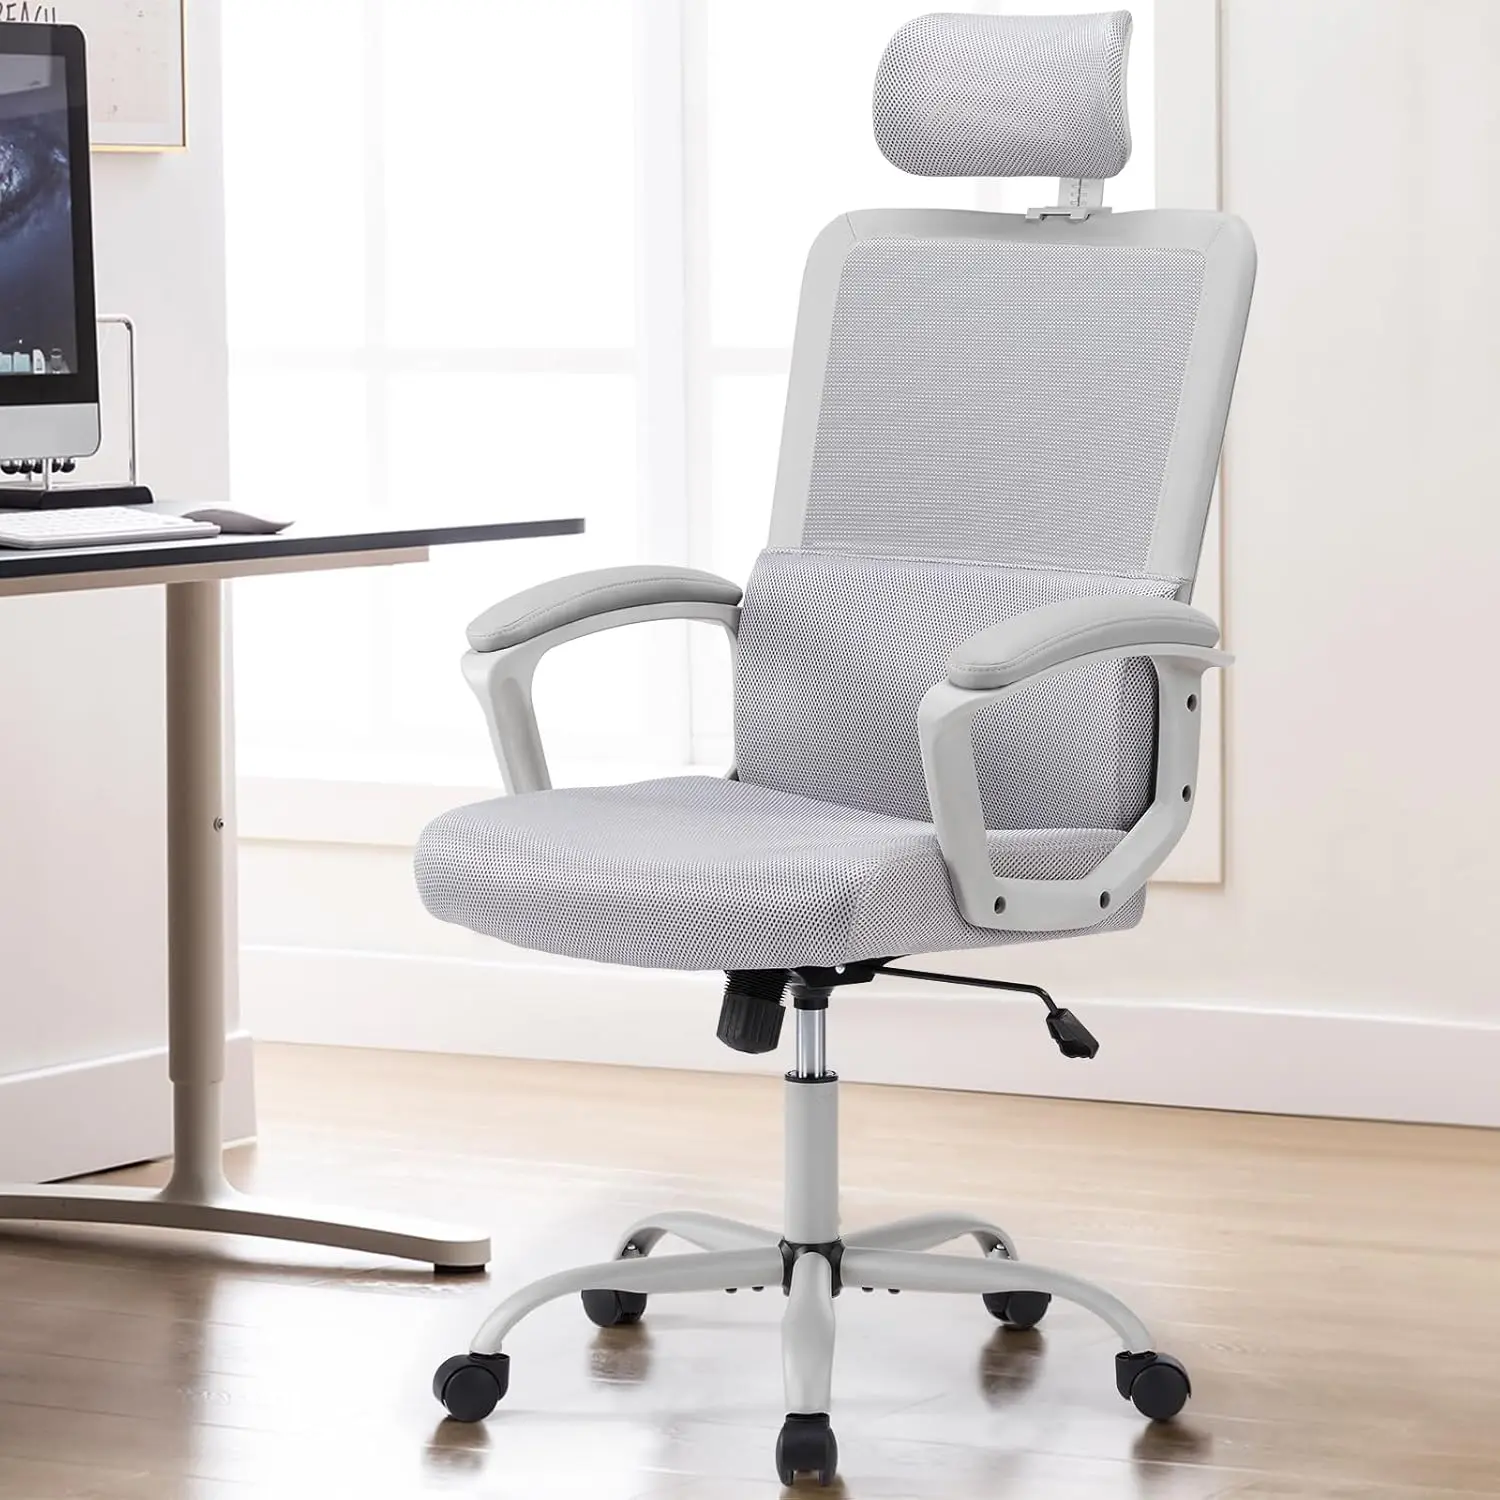 

Office Desk Computer Chair, Ergonomic High Back Comfy Swivel Gaming Home Mesh Chairs with Wheels, Lumbar Support,